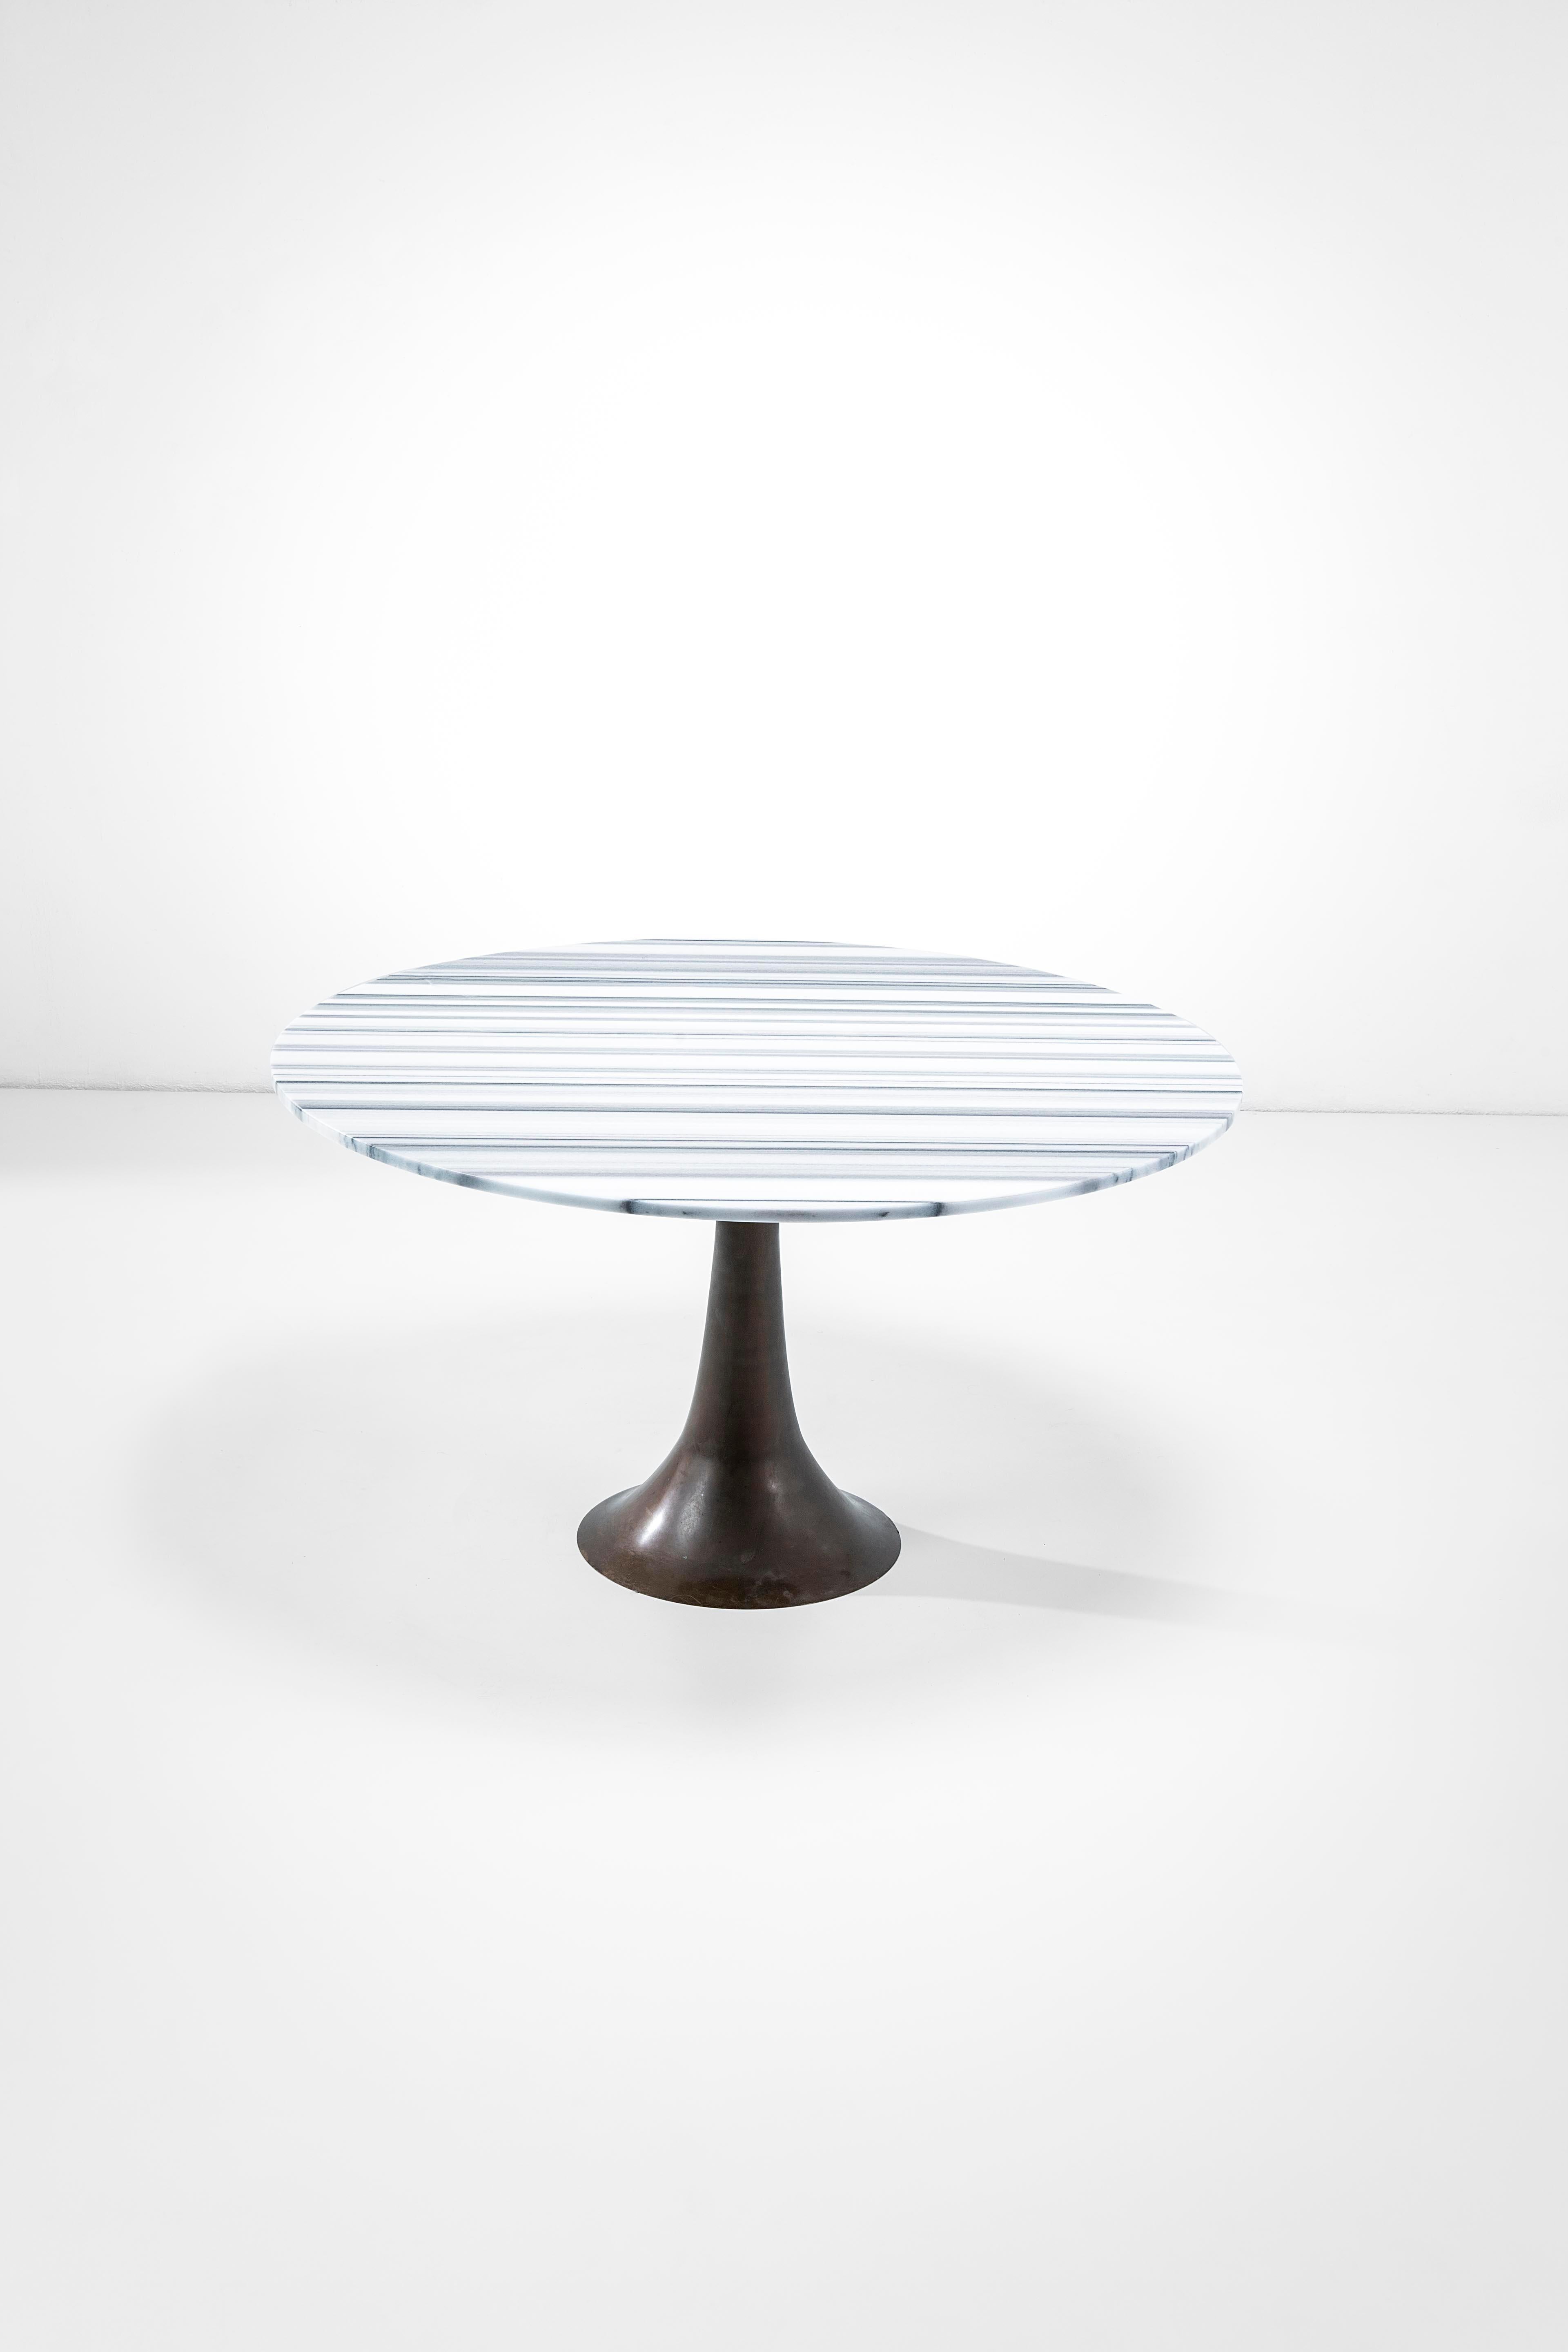 This table mod. 302 is one of Angelo Mangiarotti's perfect creations. The designer's style is evident thanks to the explicit reference to the material and the peculiar physical characteristics of each material: bronze, so malleable and resistant,